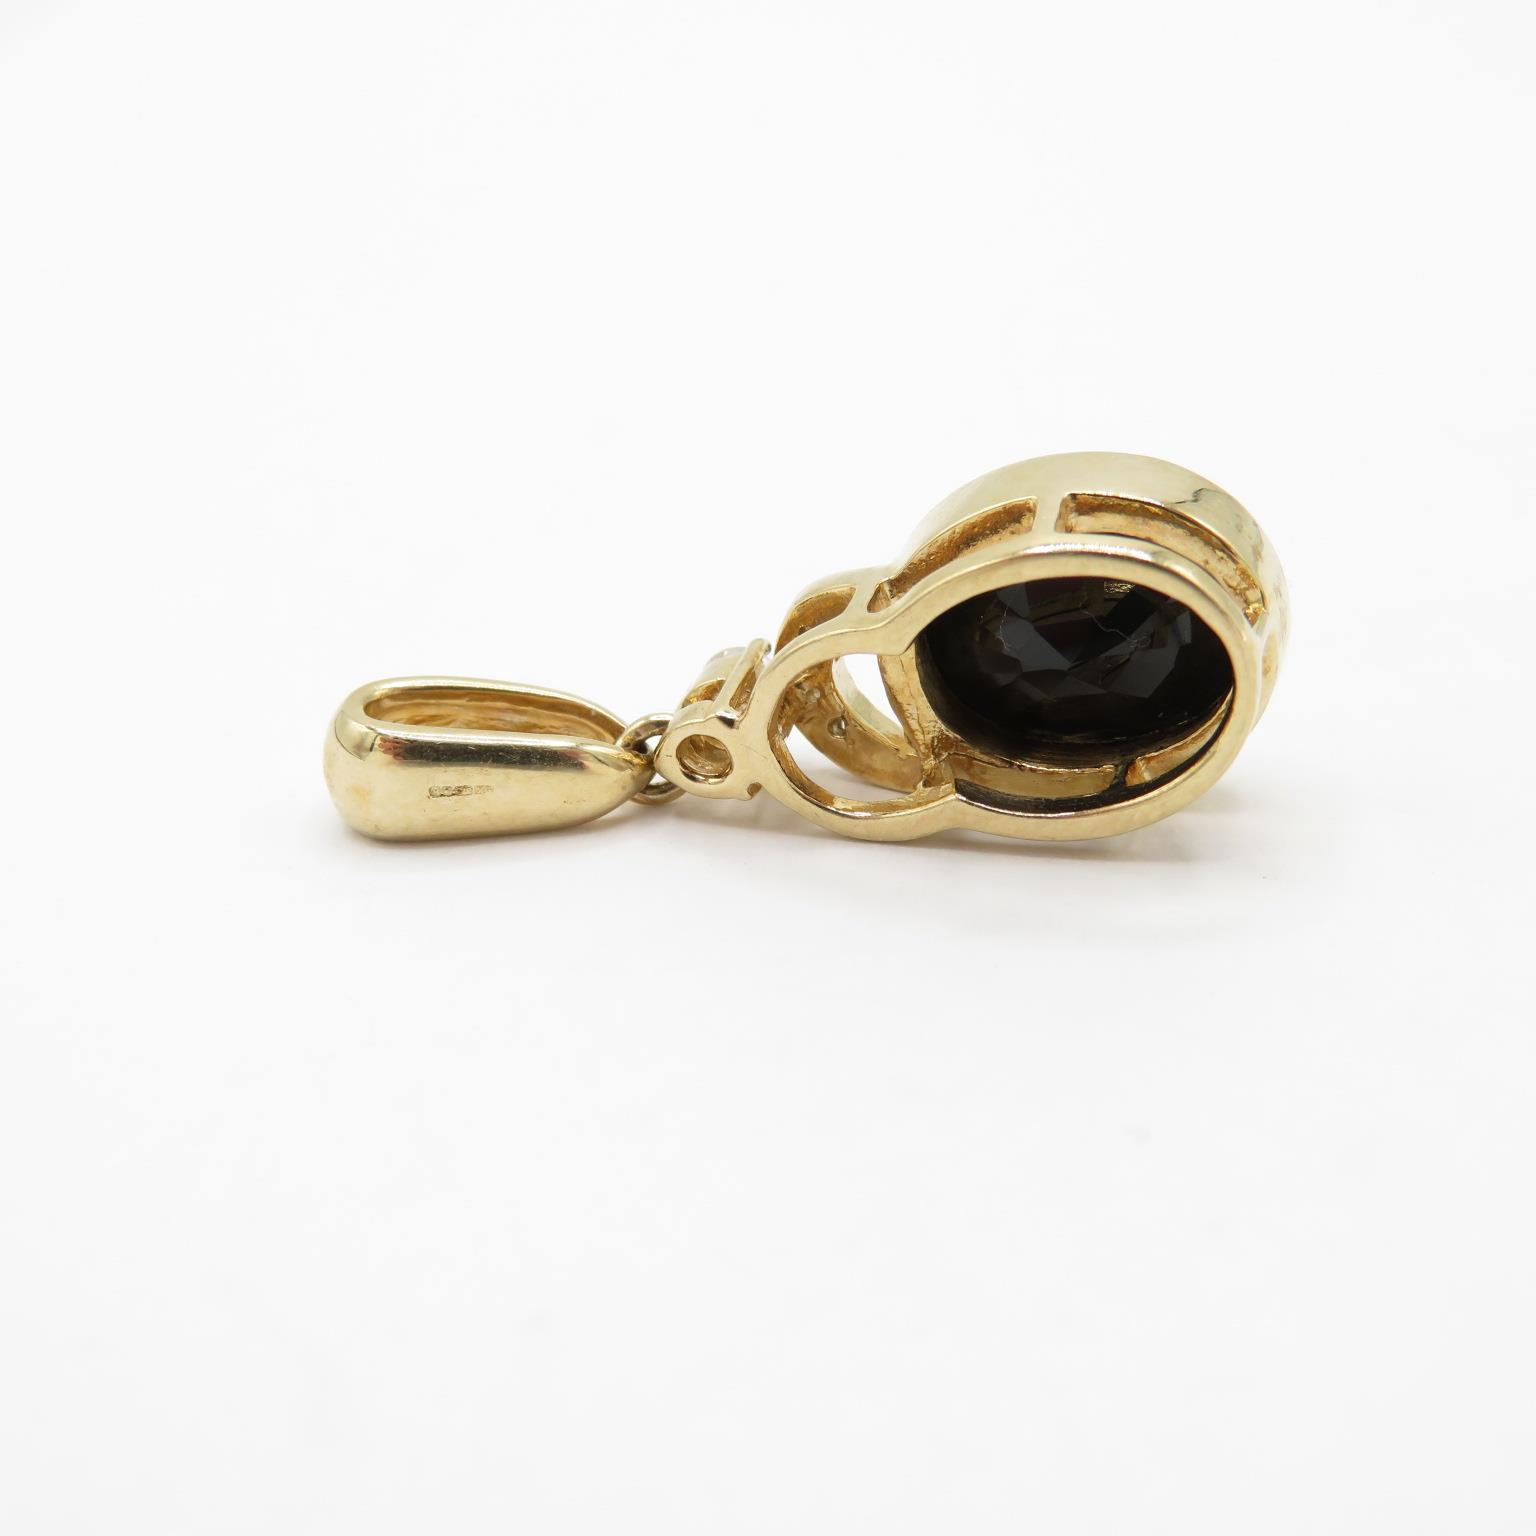 HM 9ct gold pendant with garnet centre stone and white CZ stone accents (4.1g) - Image 5 of 5